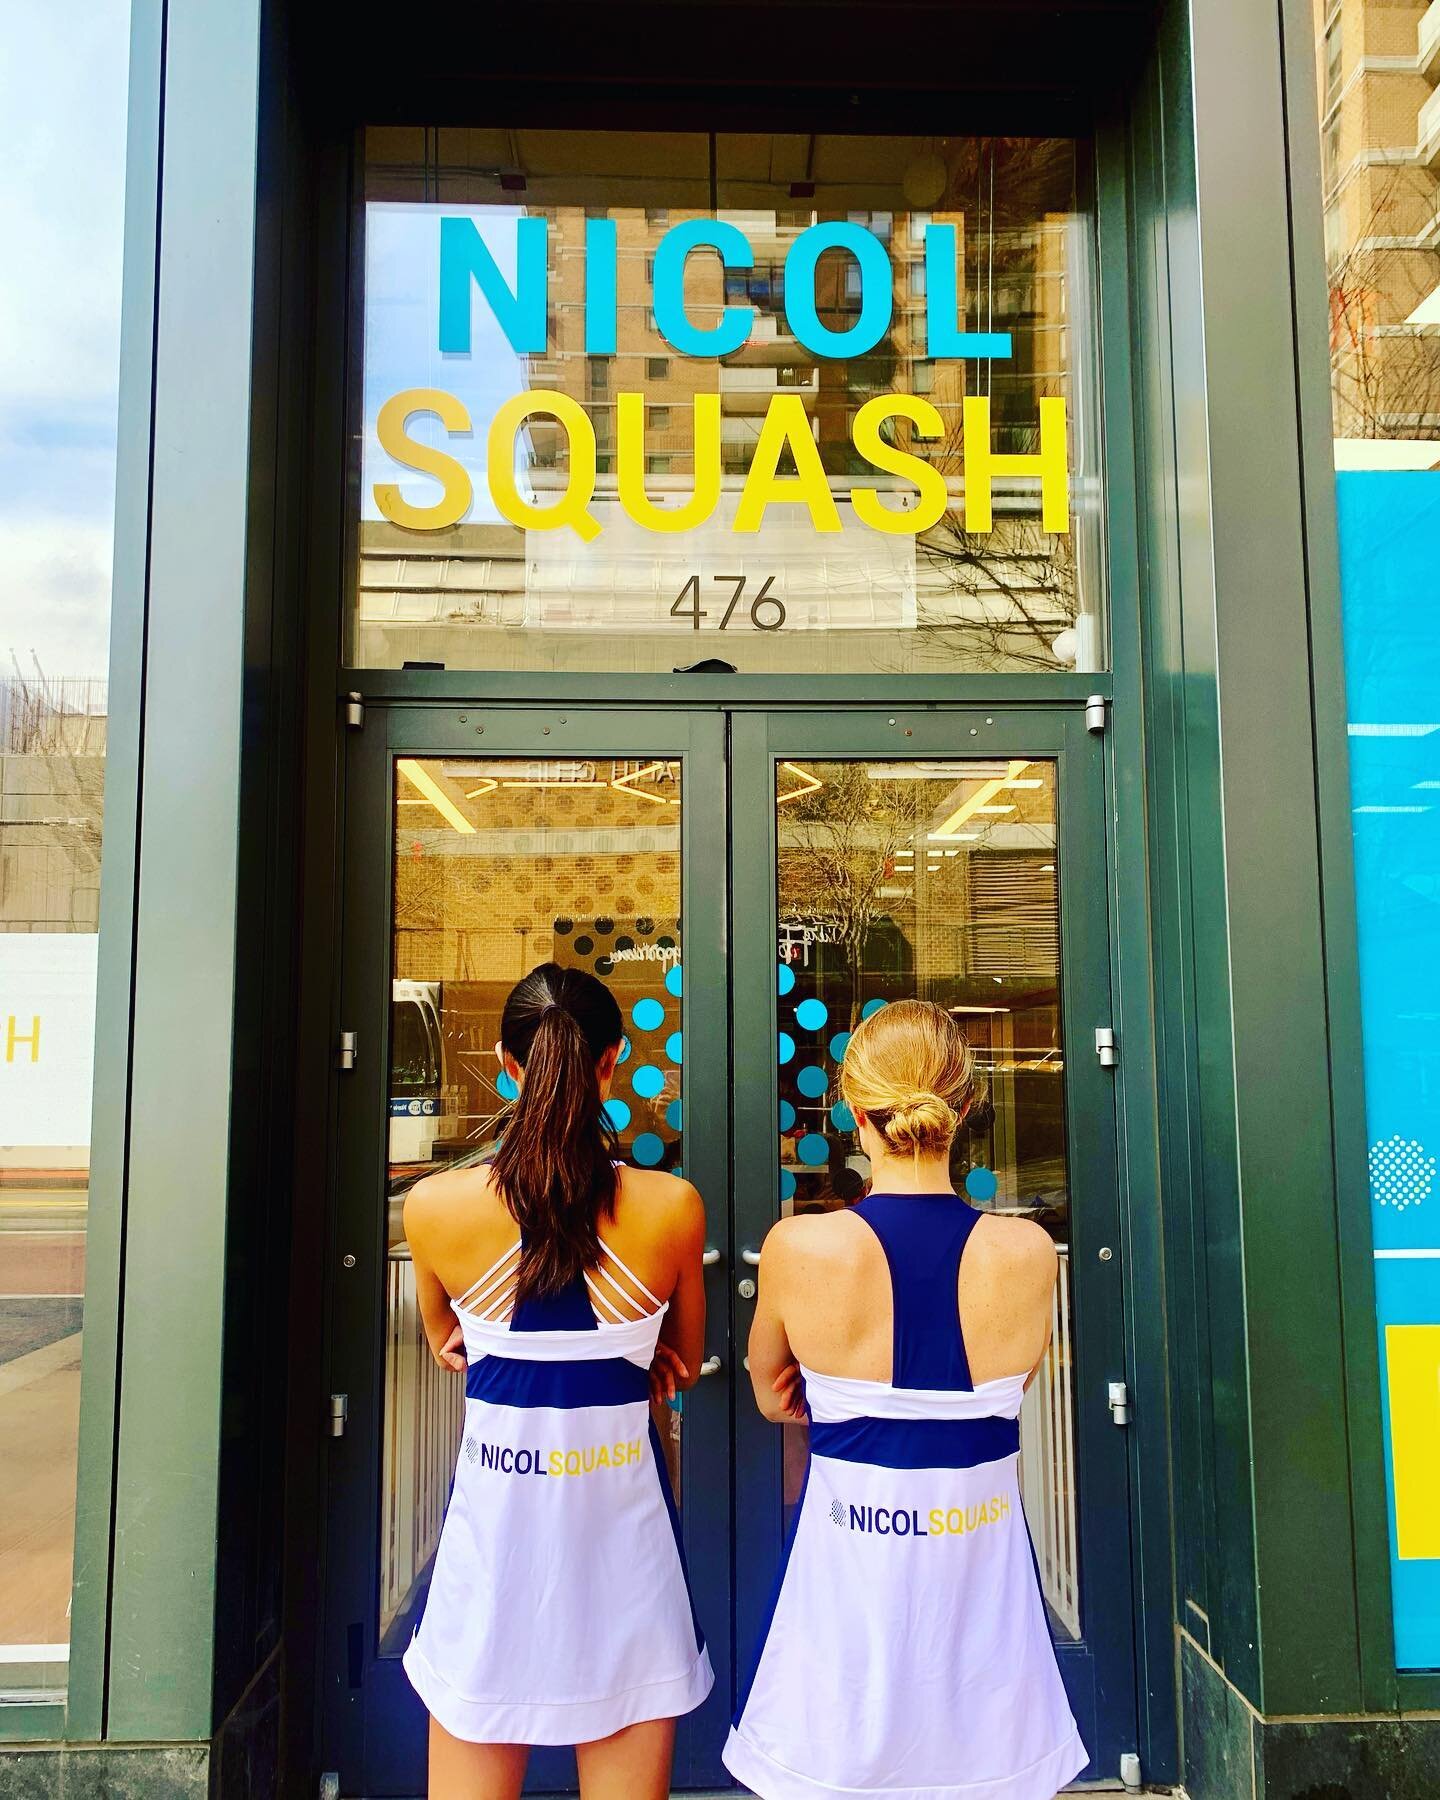 Drop it like it&rsquo;s hot in the @ofiechter x @novaapparelnyc dress this spring🔥 

On sale exclusively at Nicol Squash!

#getitgirl #nycstyle #nycfit #nycfitness #tennisdress #squash